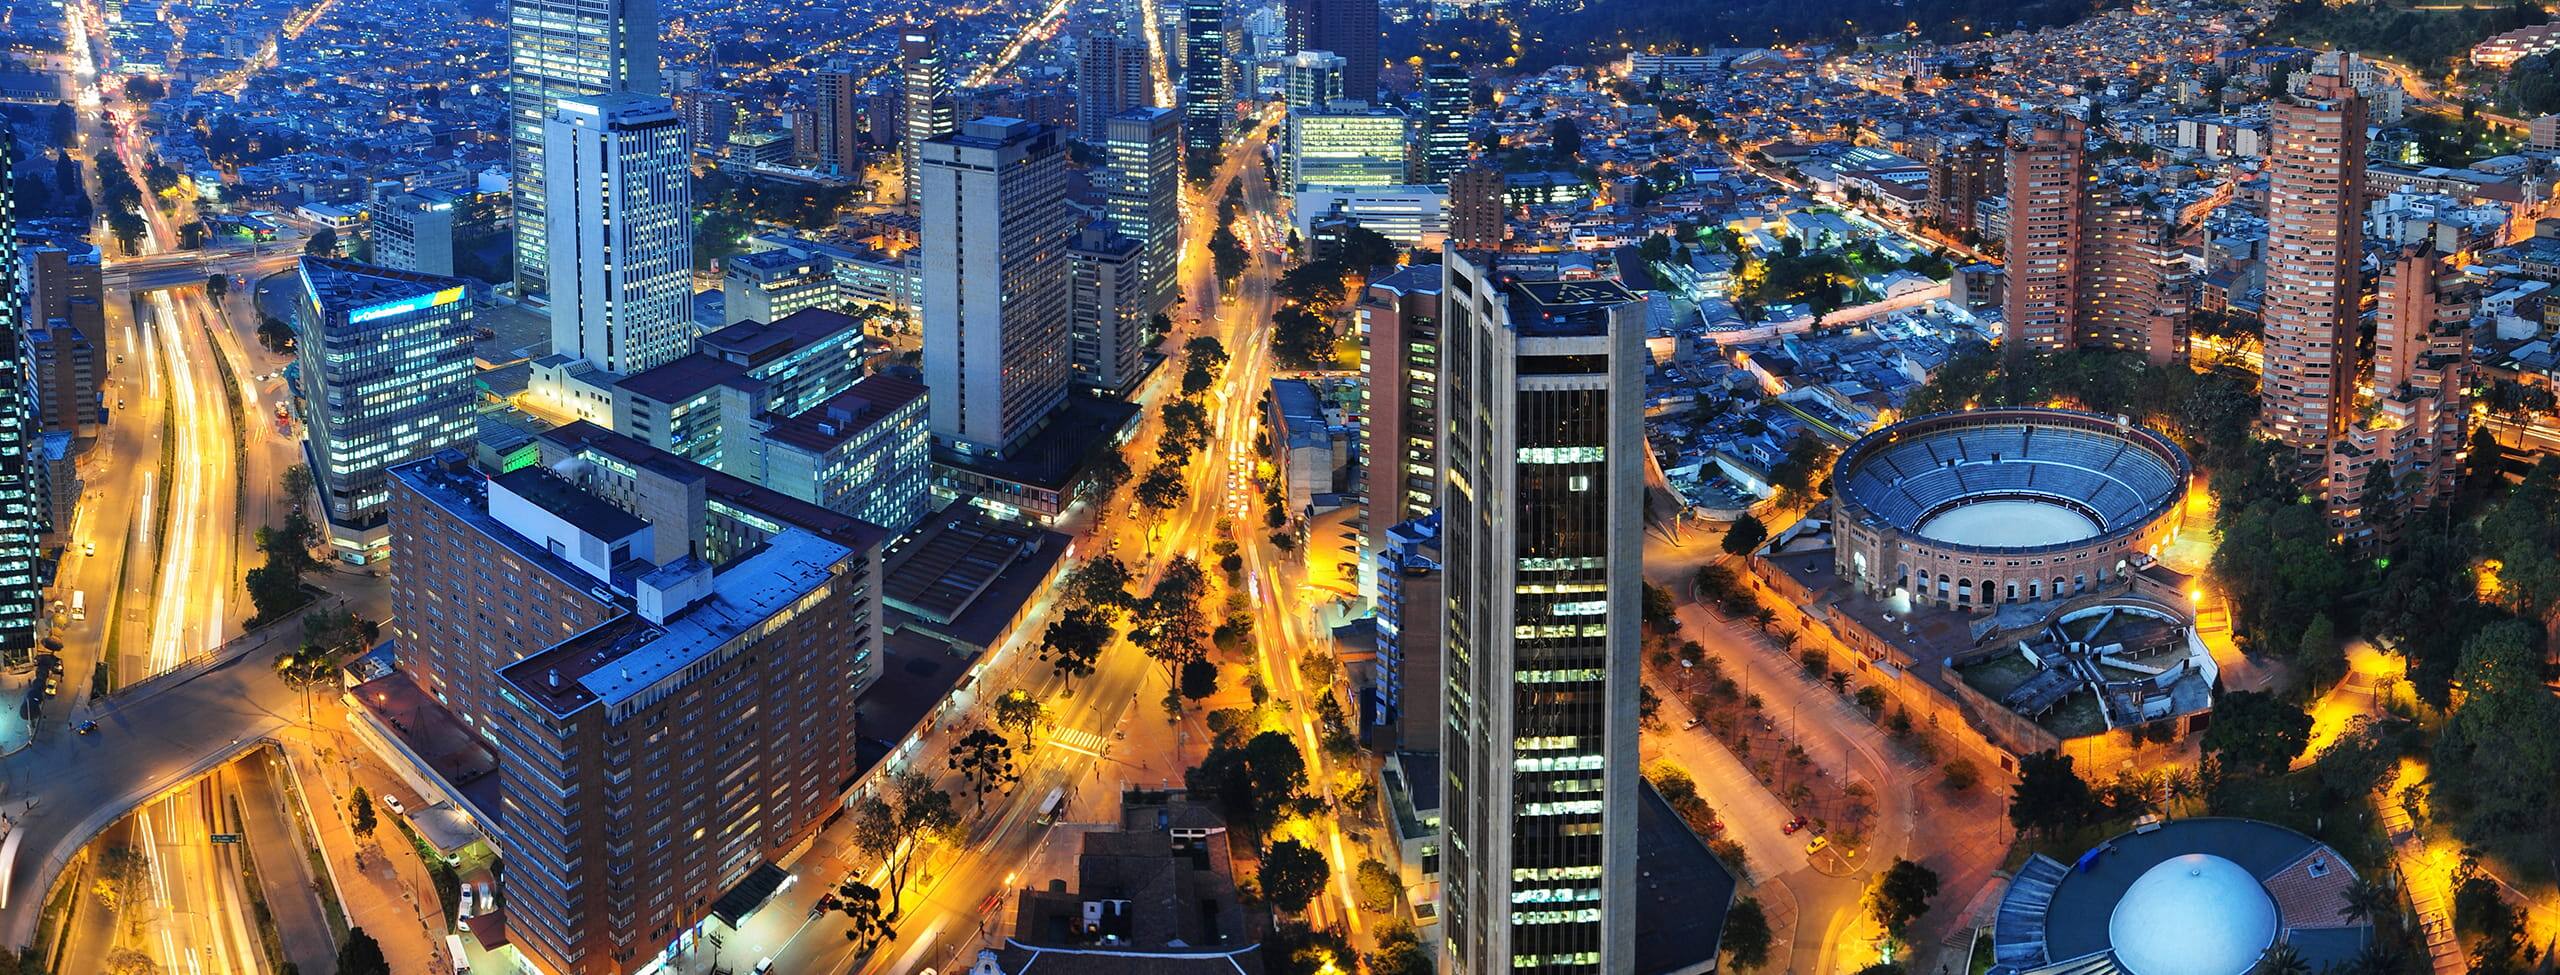 Bogota Colombia Aerial View